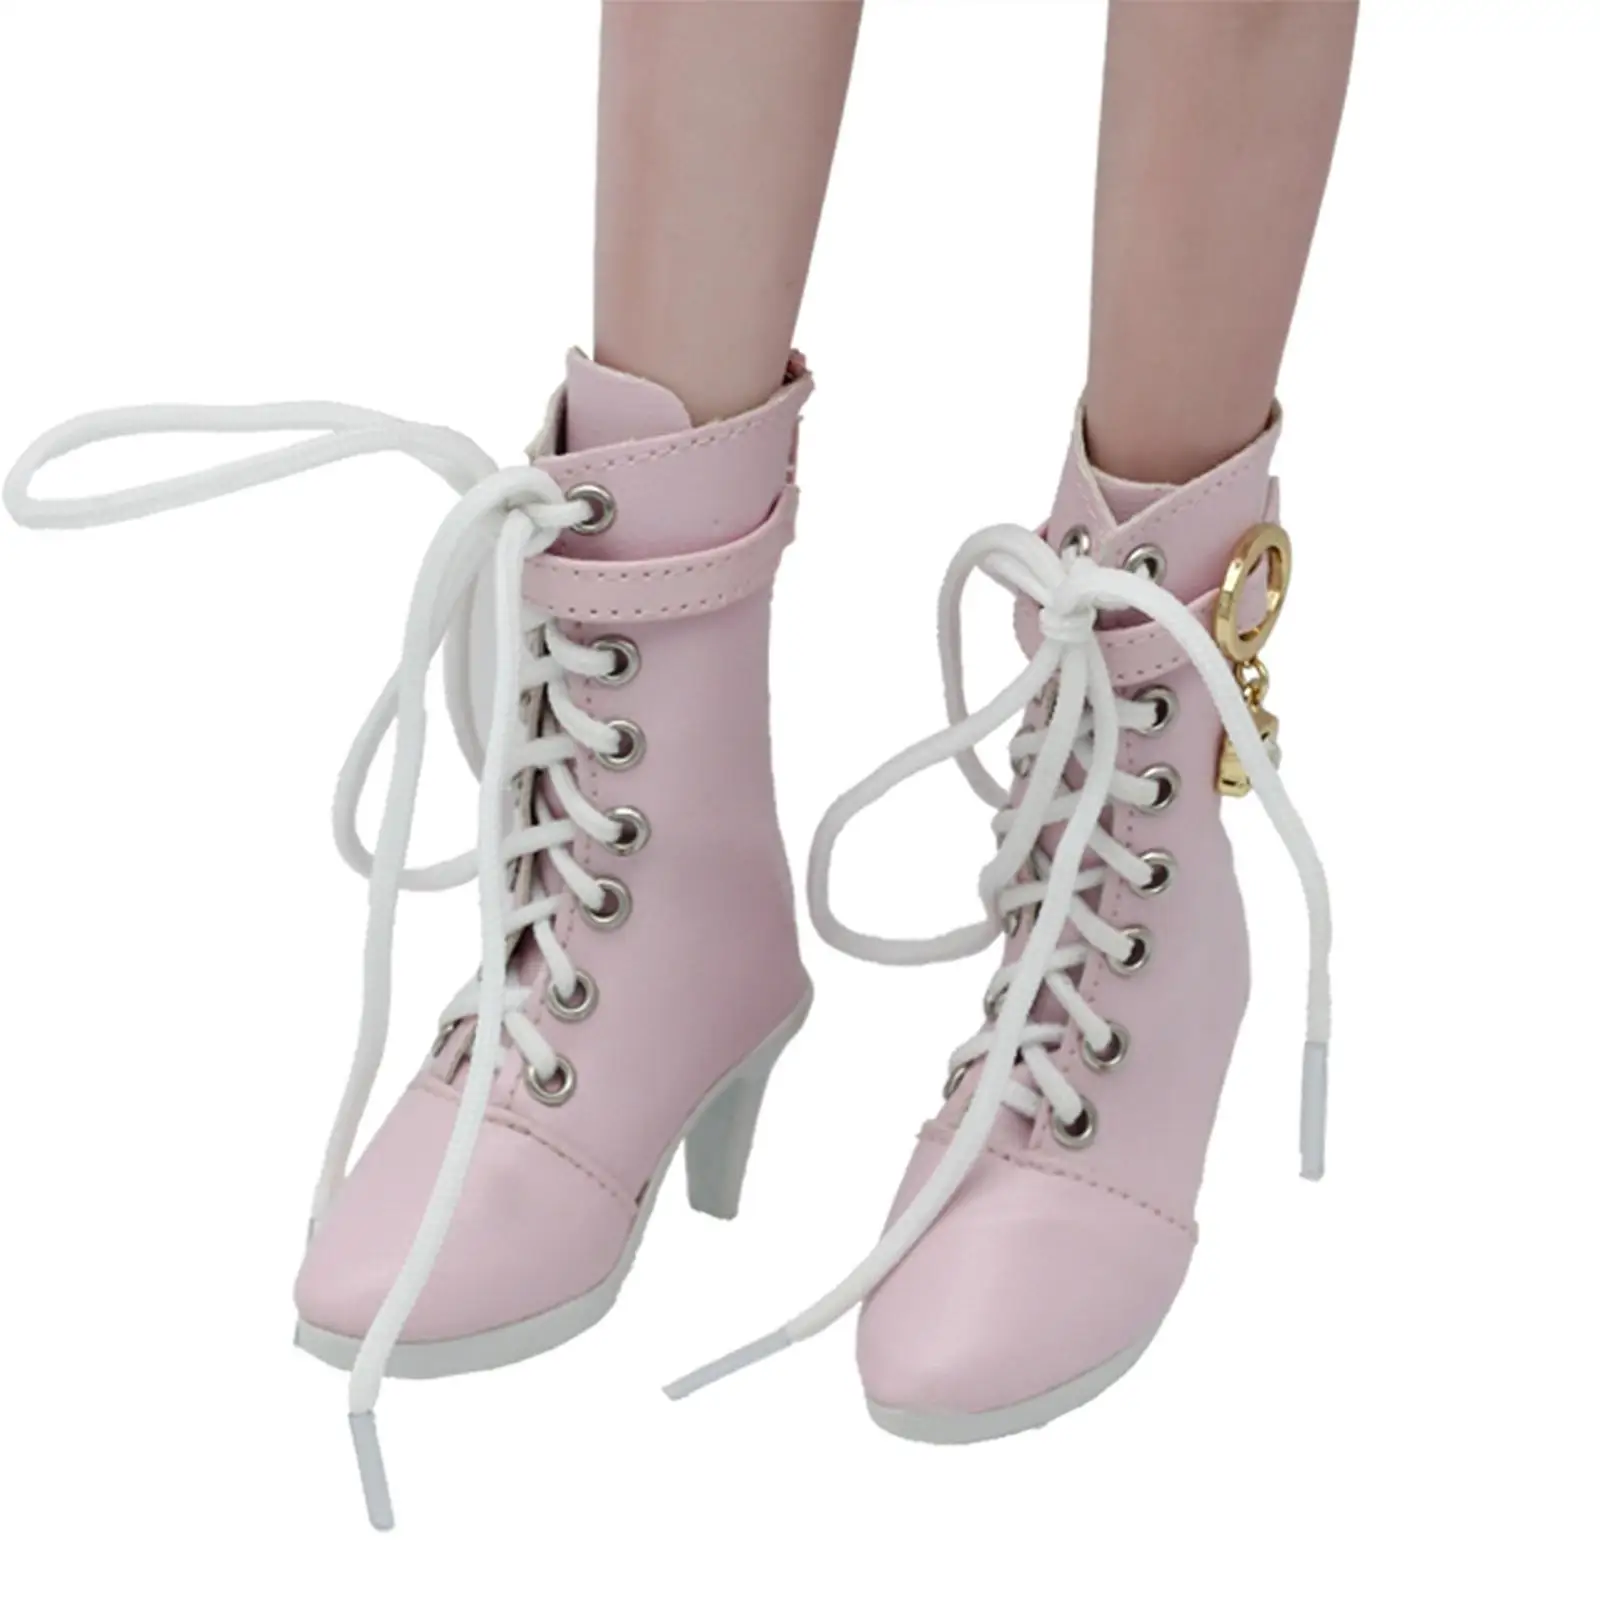 Dolls High Heels Boots Fashion Costume Accessories Doll Boots Miniature Boots Shoes for 1/3 Figures Dolls Part Accessory